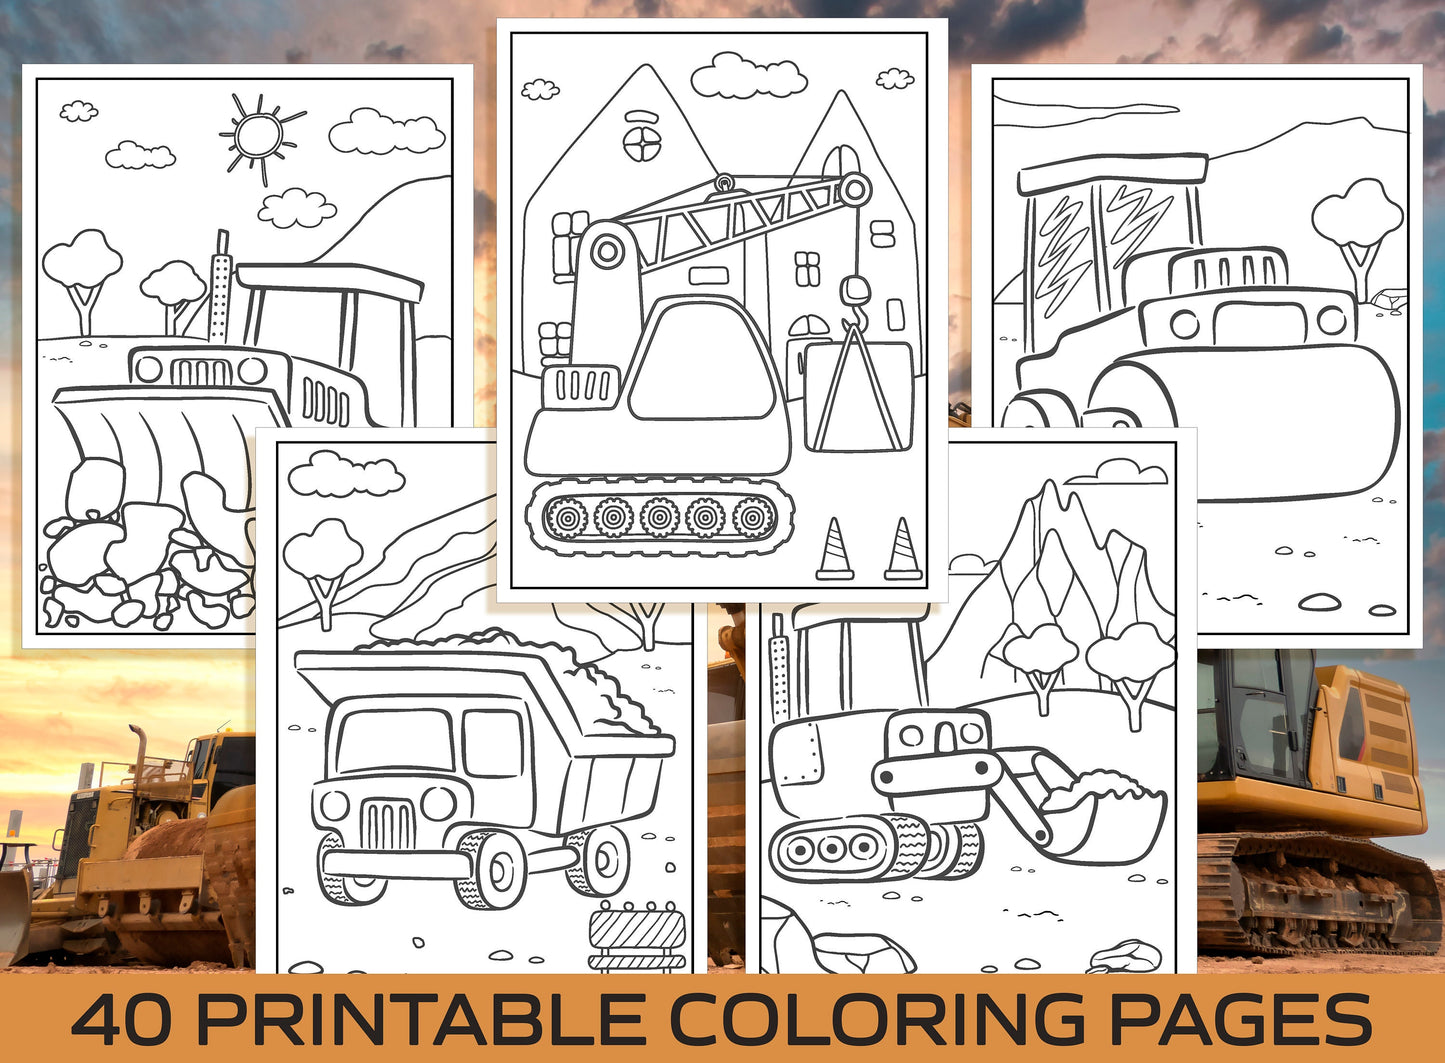 Construction Coloring Pages - 40 Printable Construction Coloring Pages for Kids, Boys, Girls. Construction Party Activity, Instant Download.